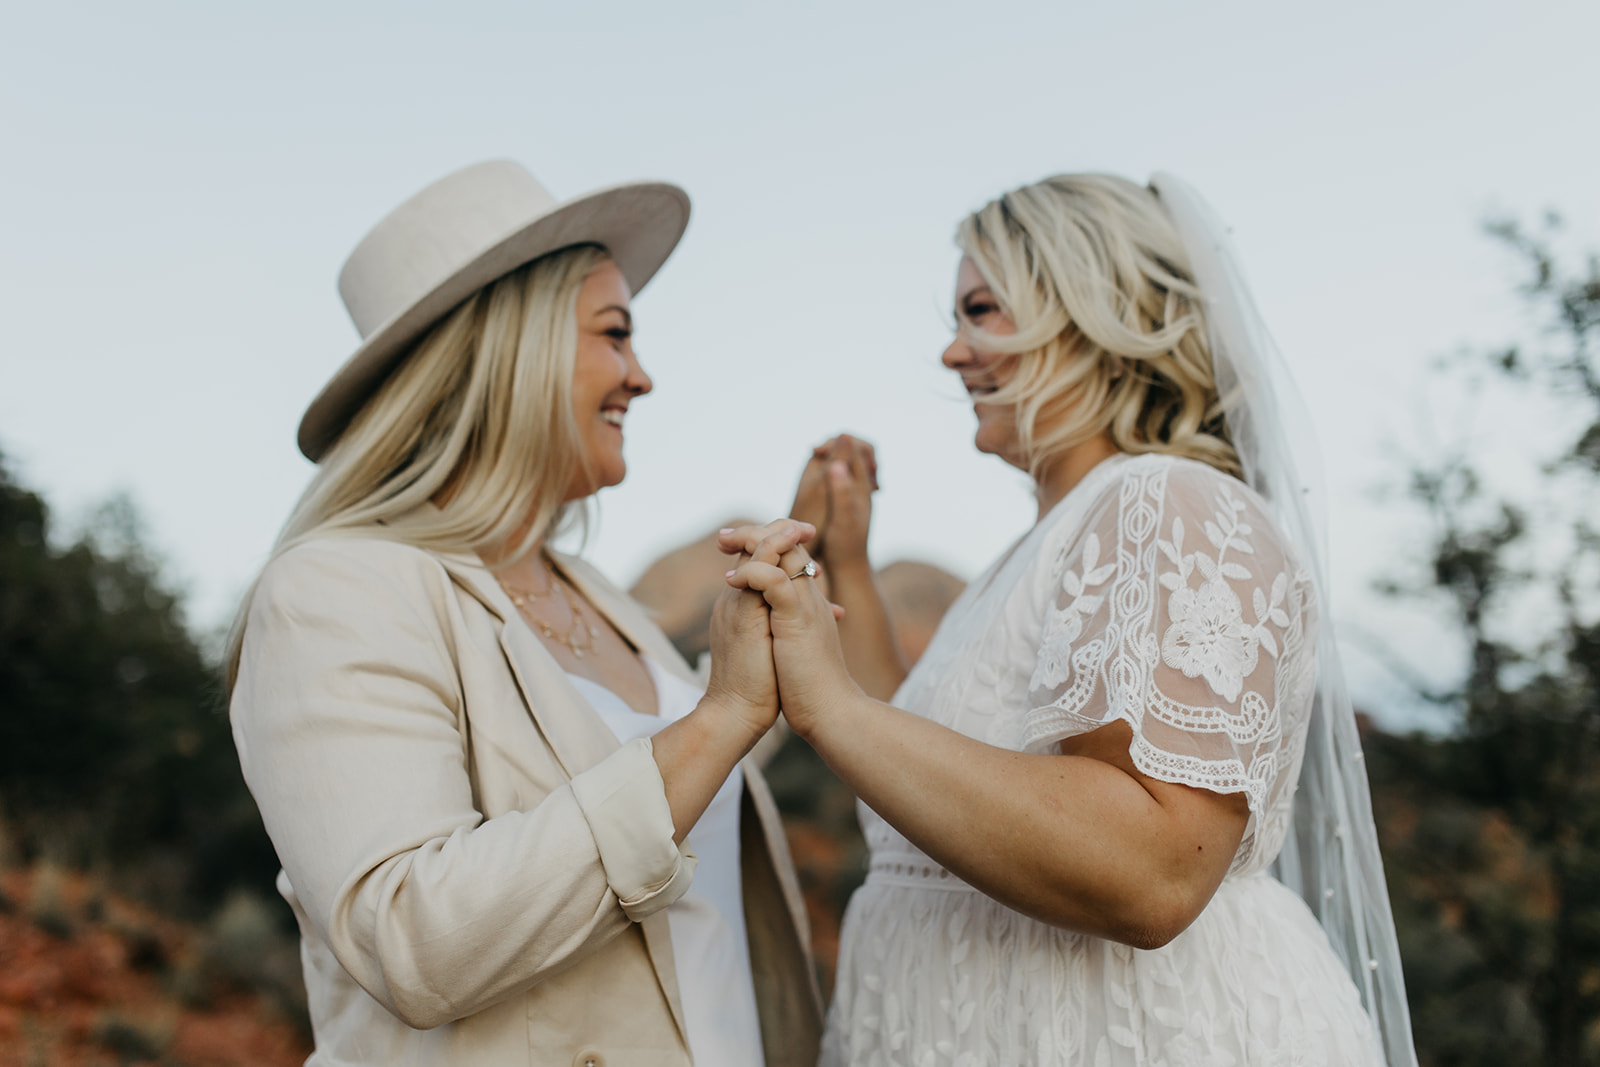 Sedona Elopement of Jane and Katelyn, a Queer Couple